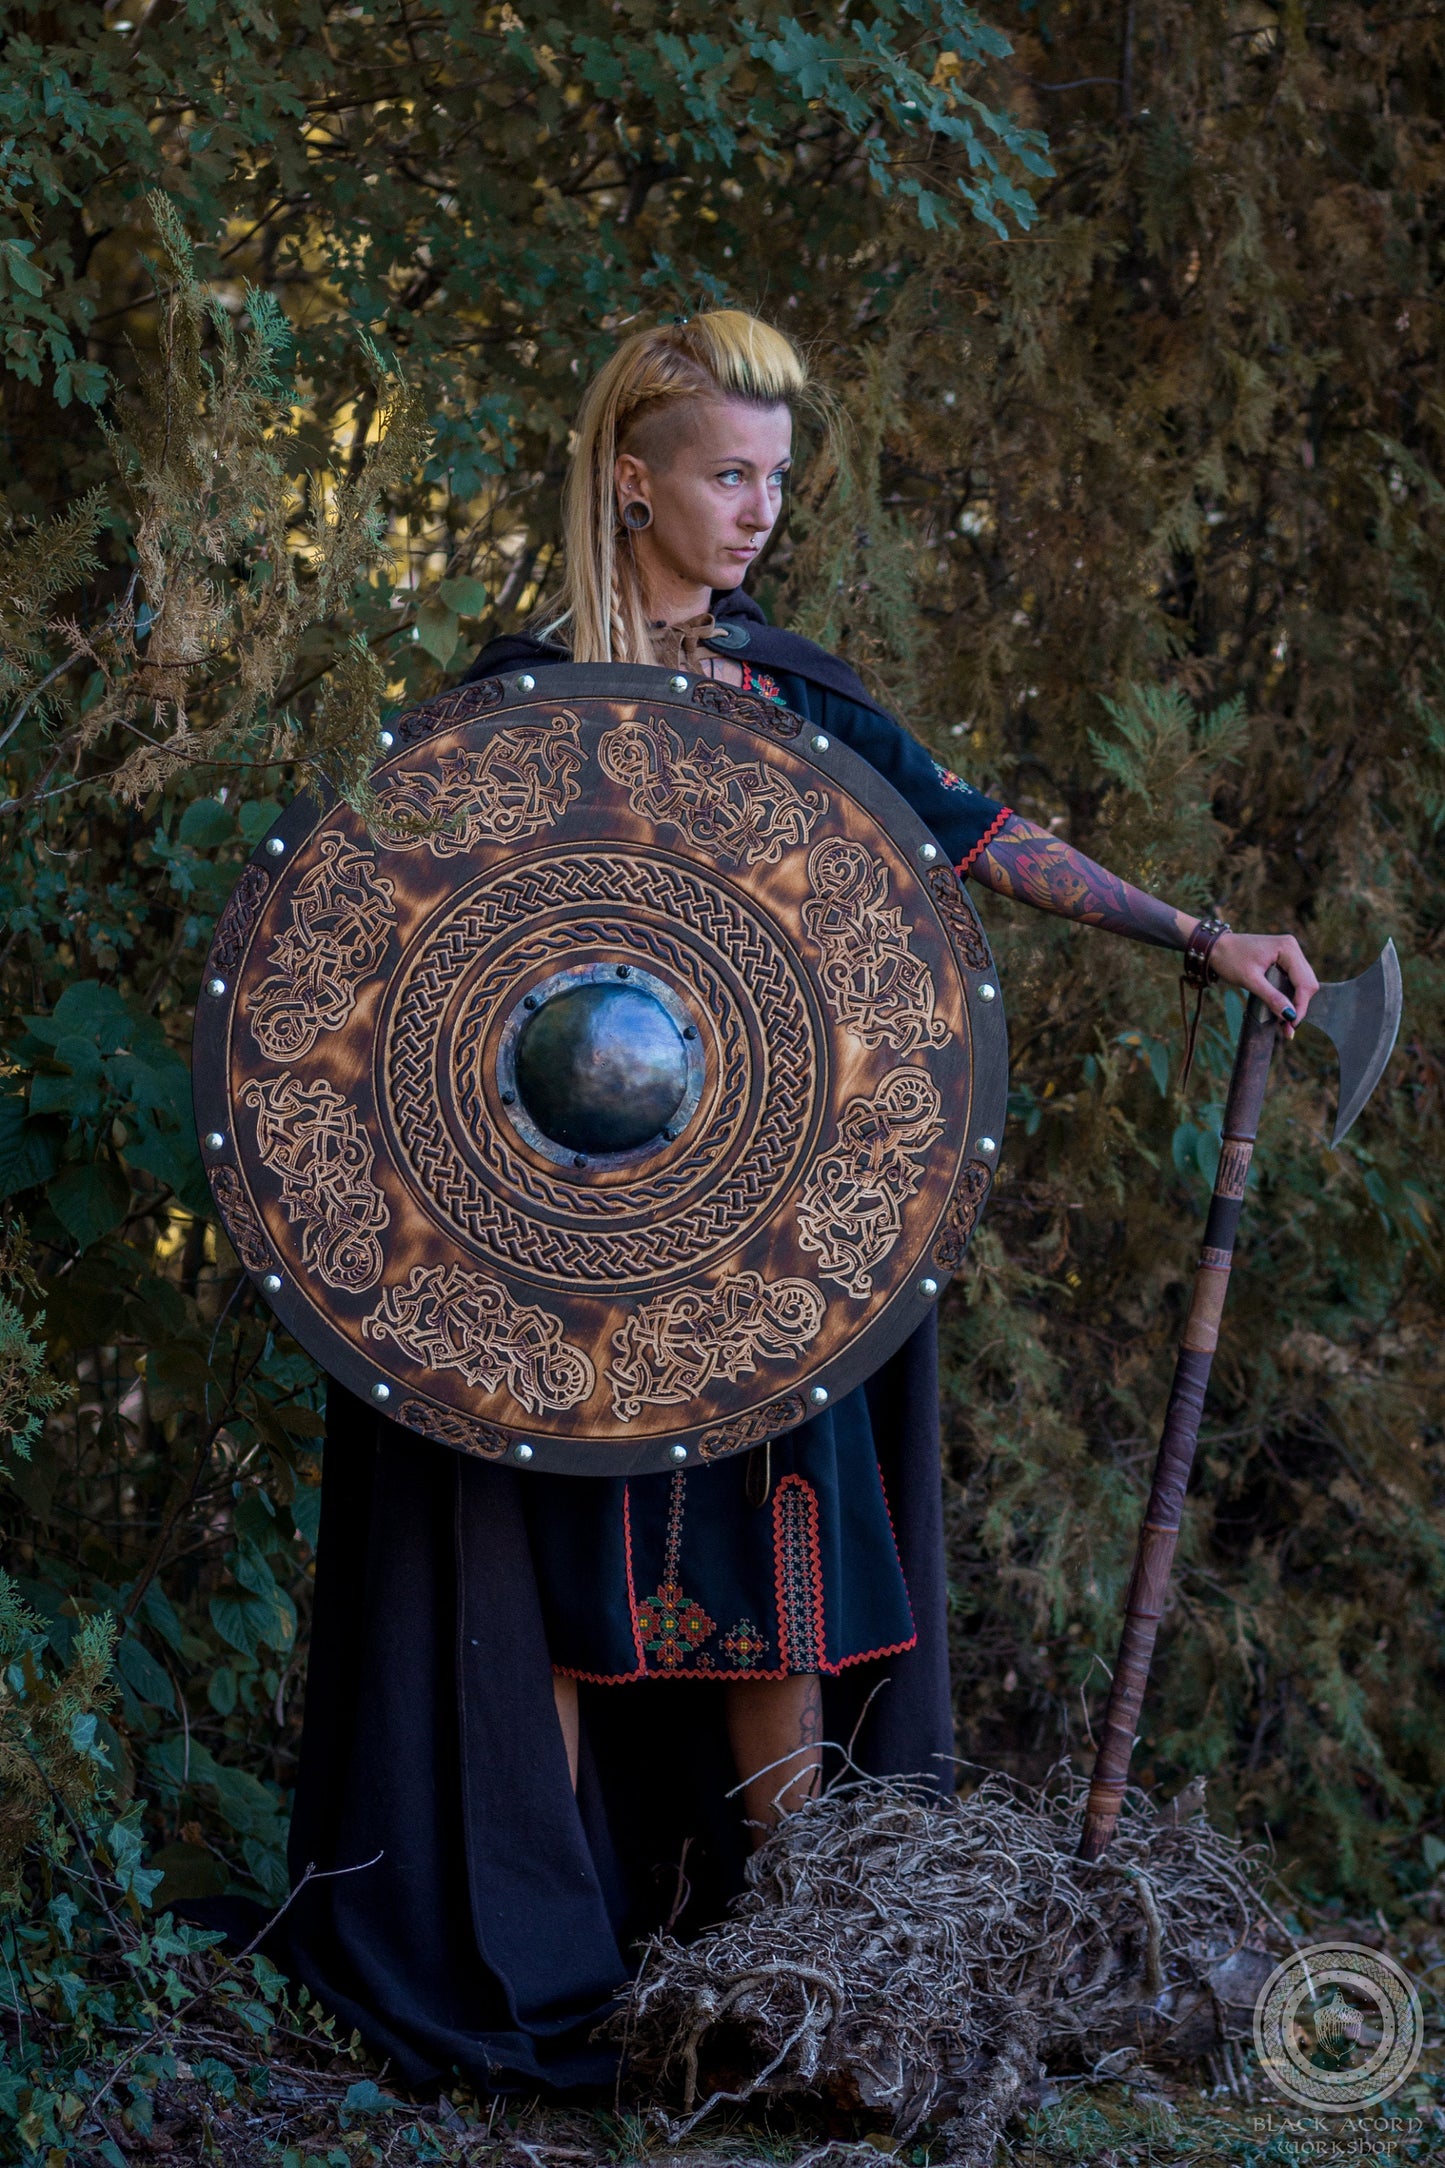 Handmade Viking Shield with Carved Jellinge Norse Drake Ornaments, 24"